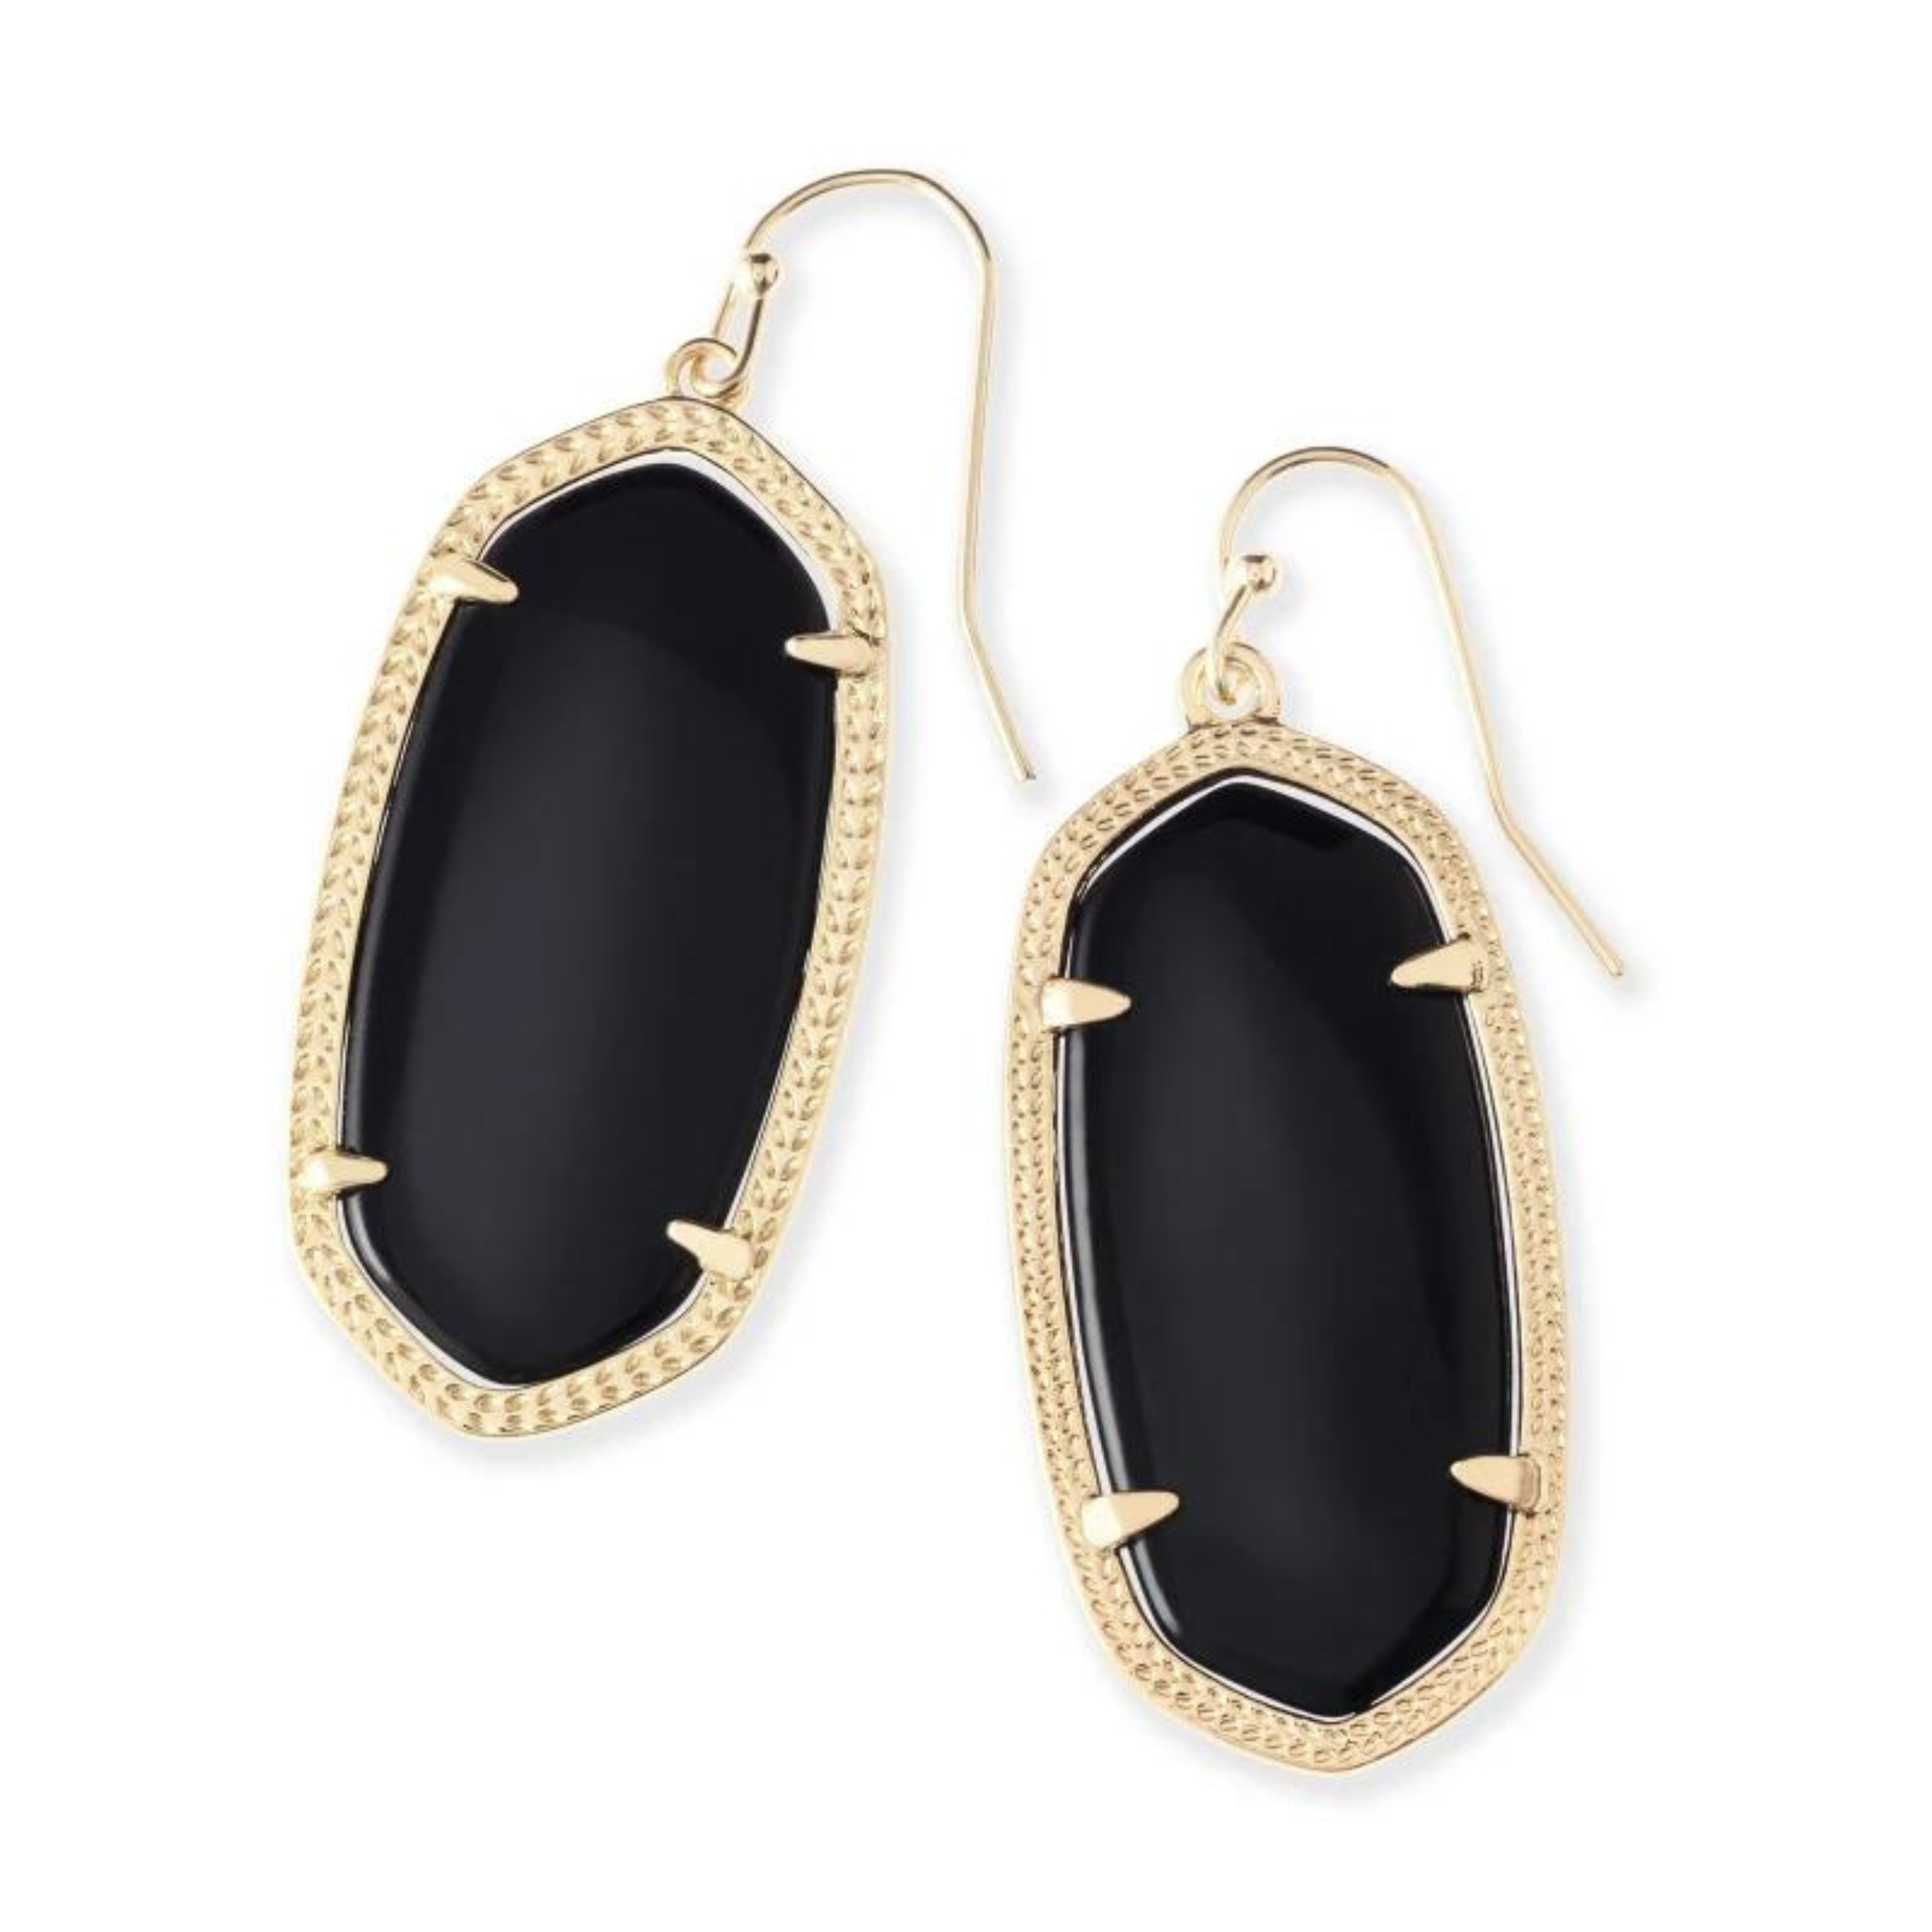 Gold drop earrings with black opaque glass, pictured on a white background.